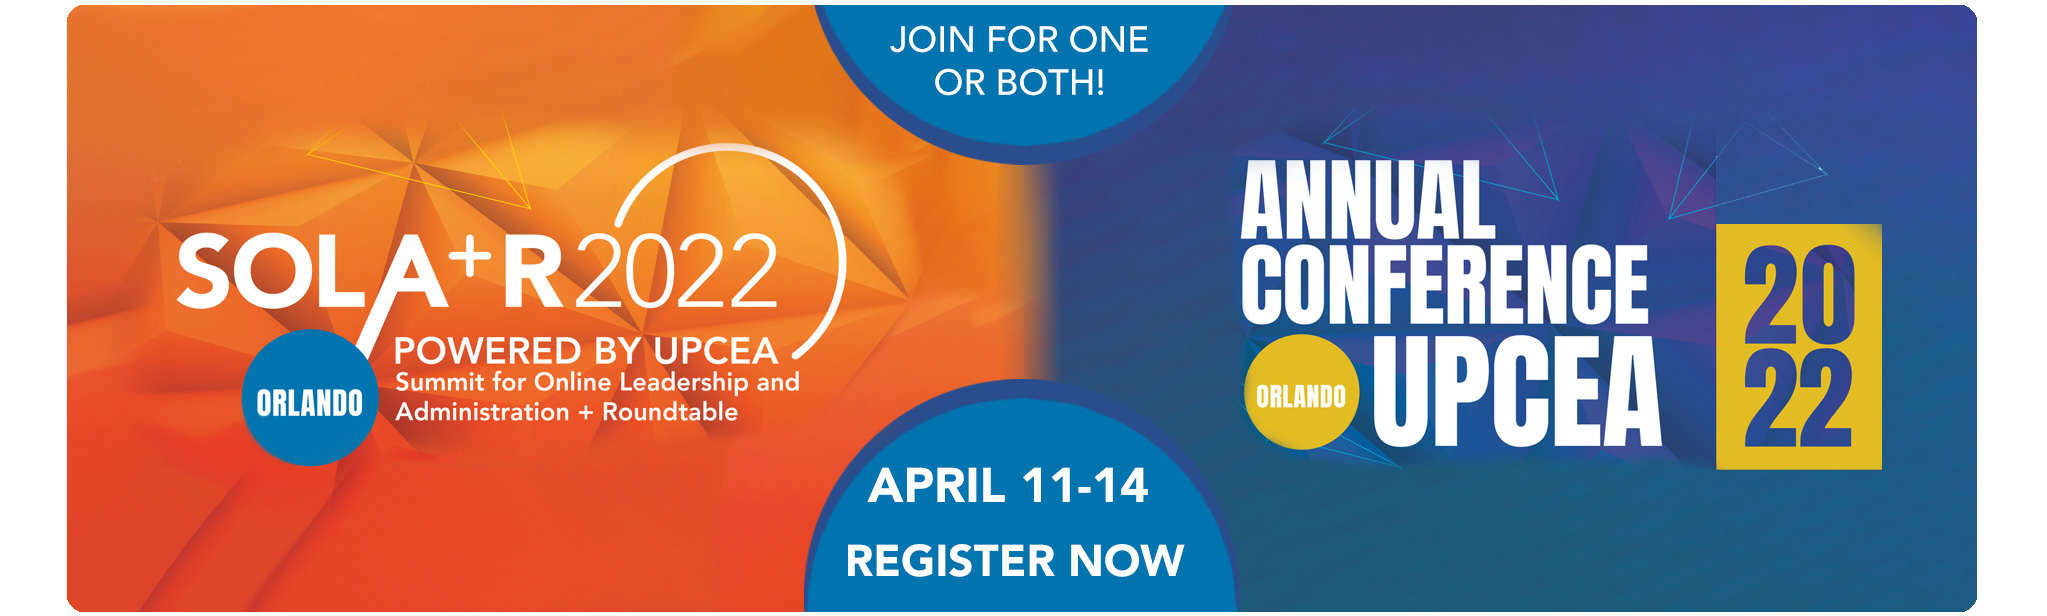 2022 SOLA+R Summit for Online Leadership and Administration + Roundtable | 2022 UPCEA Annual Conference | April 11- 14, 2022 | Orlando, FL